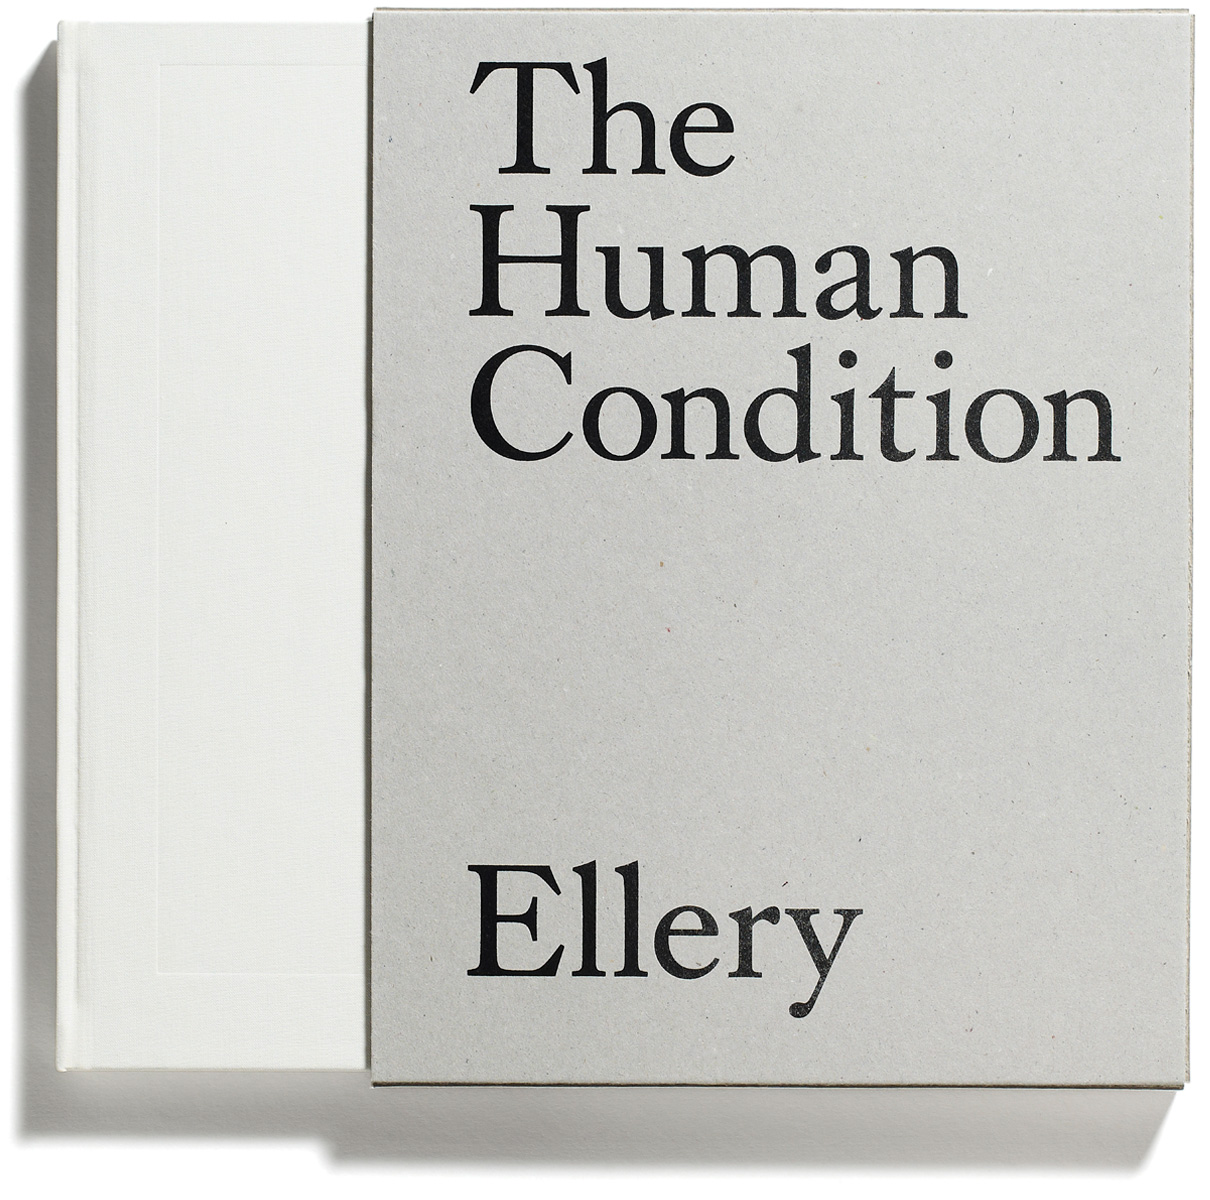 Browns Editions, Browns Editions Publishing, Browns Editions Books, Browns Editions Jonathan Ellery, Browns Editions The Human Condition, Browns Editions Jonathan Ellery The Human Condition